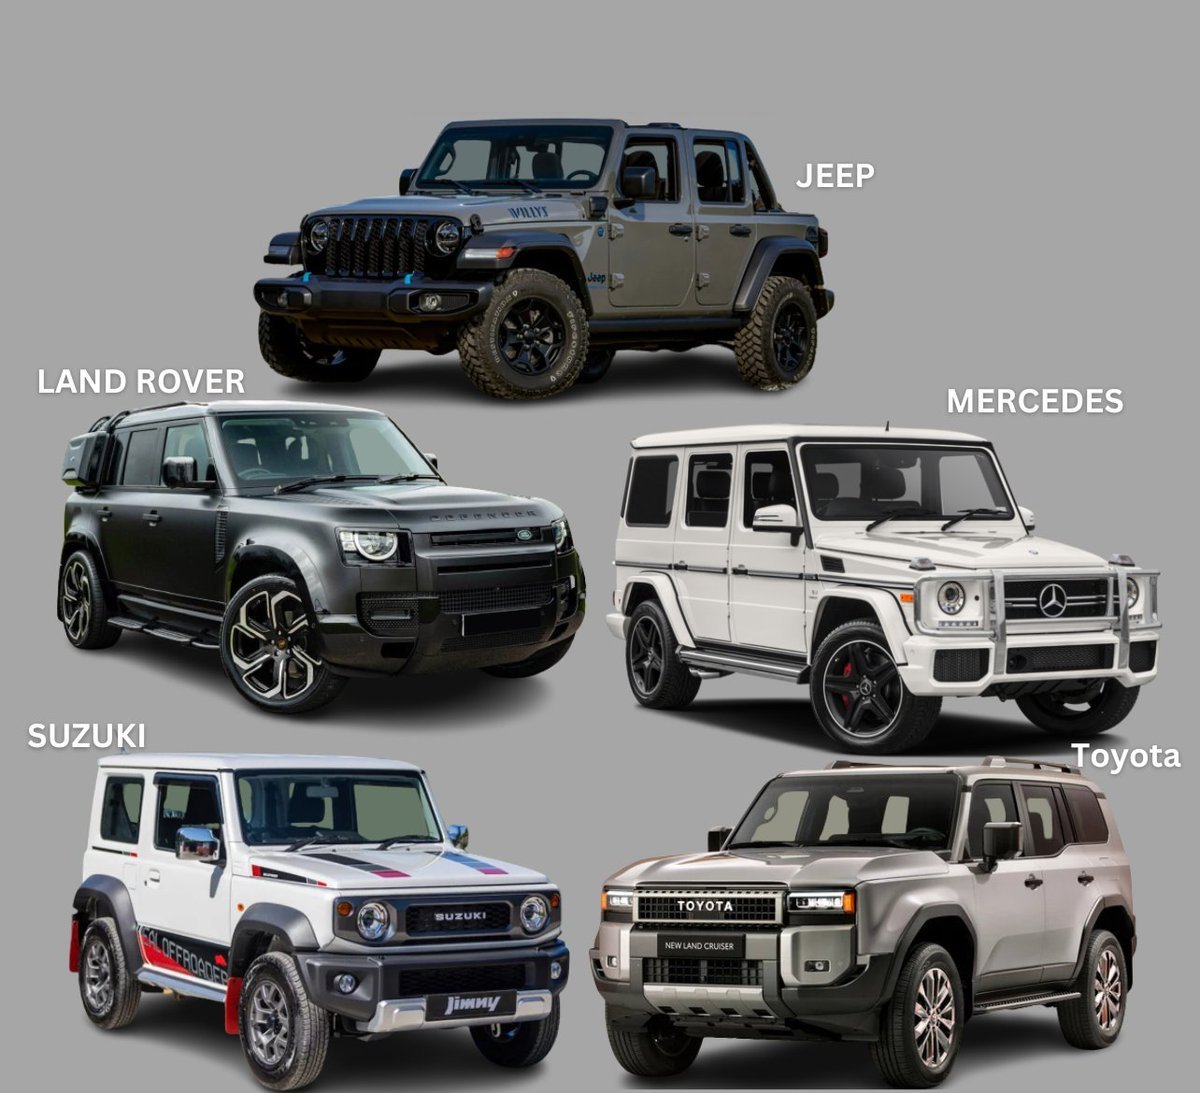 You just won a competition to win a car. Which car are you choosing?